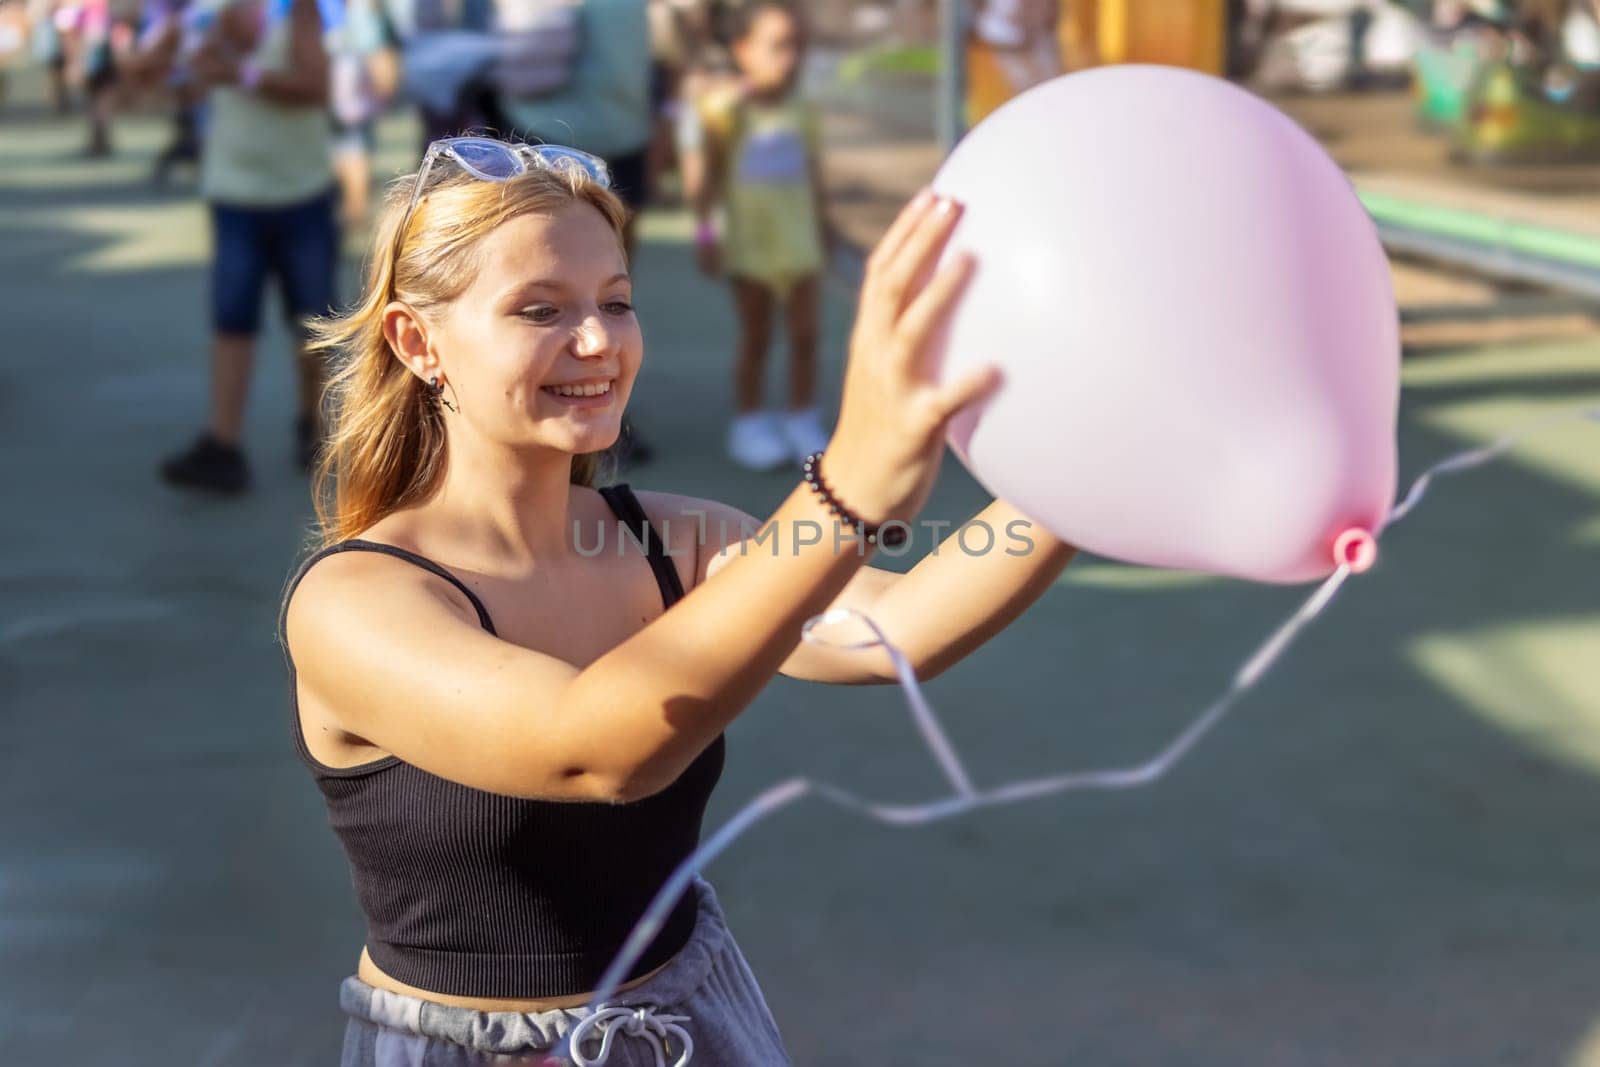 A teenage girl of European appearance happily poses with a large pink balloon in the city. by PopOff